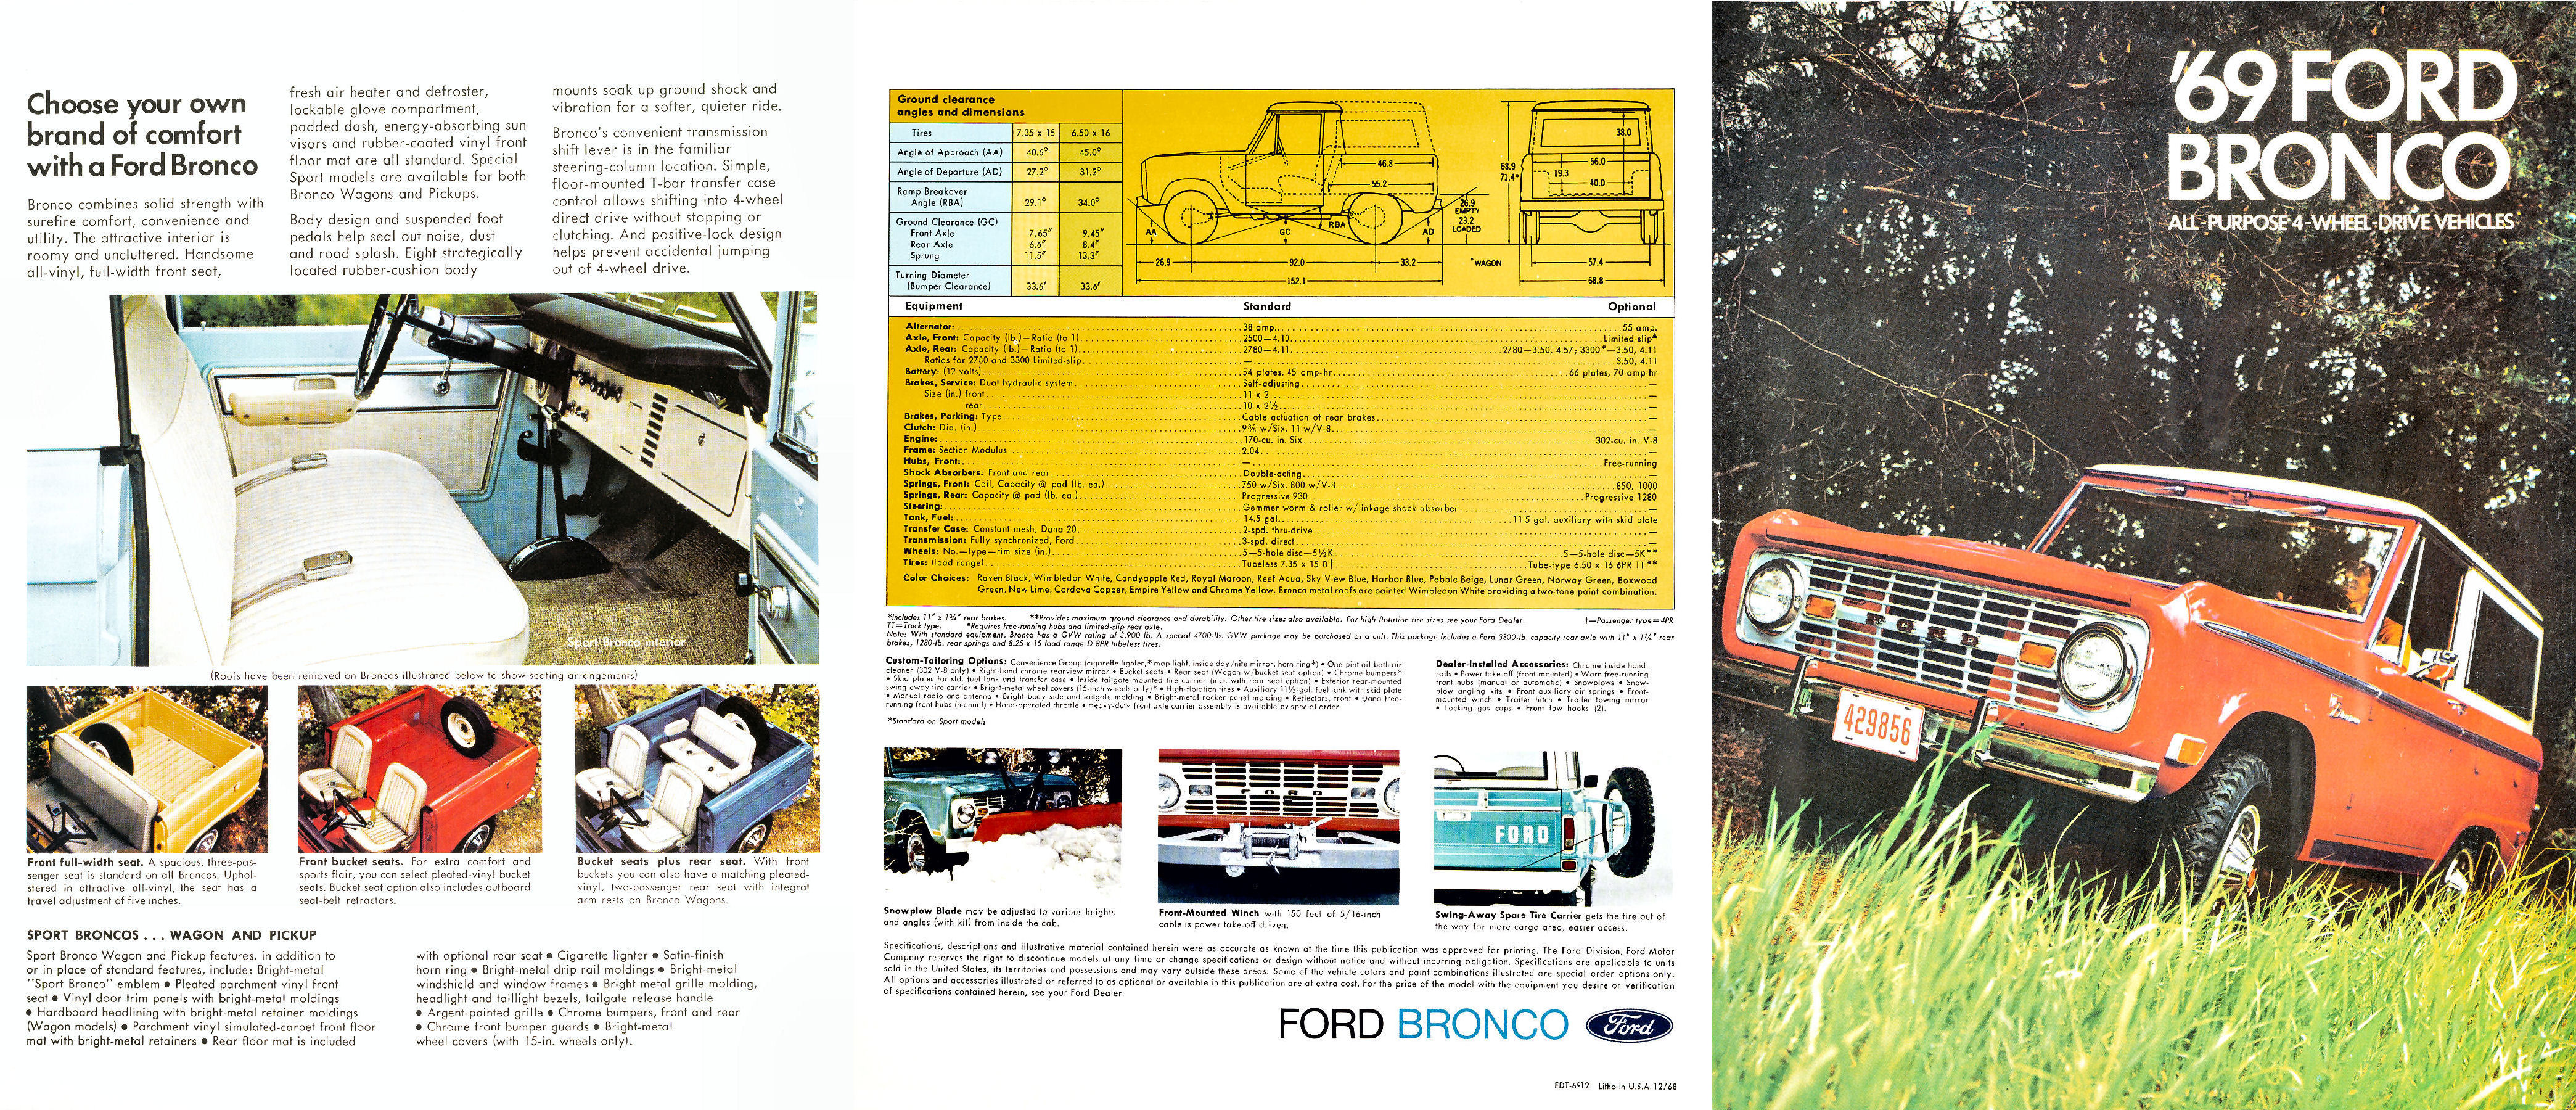 1969 Ford Bronco-Side A